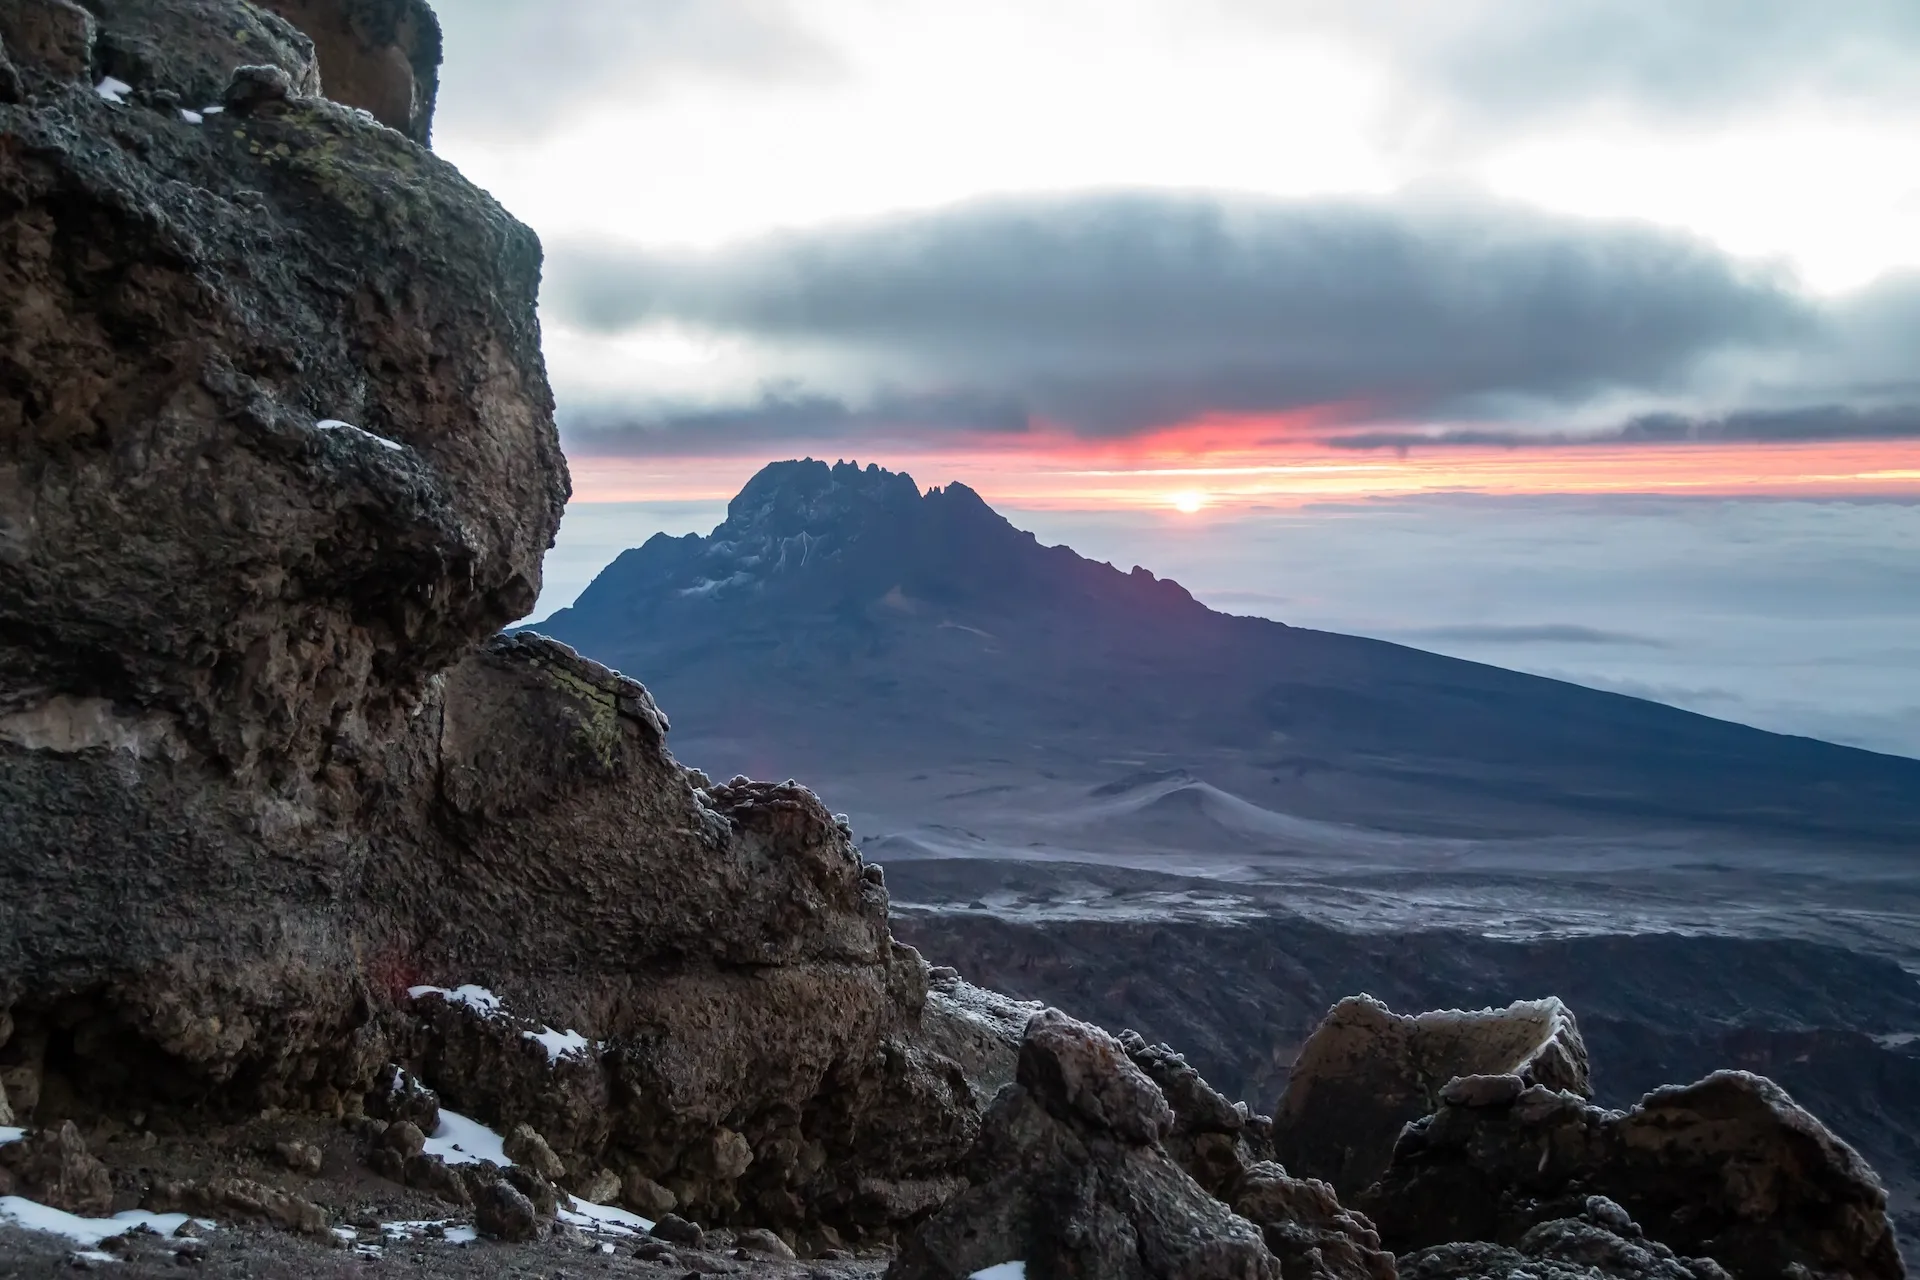 One may expect epic Kilimanjaro panoramas on all routes